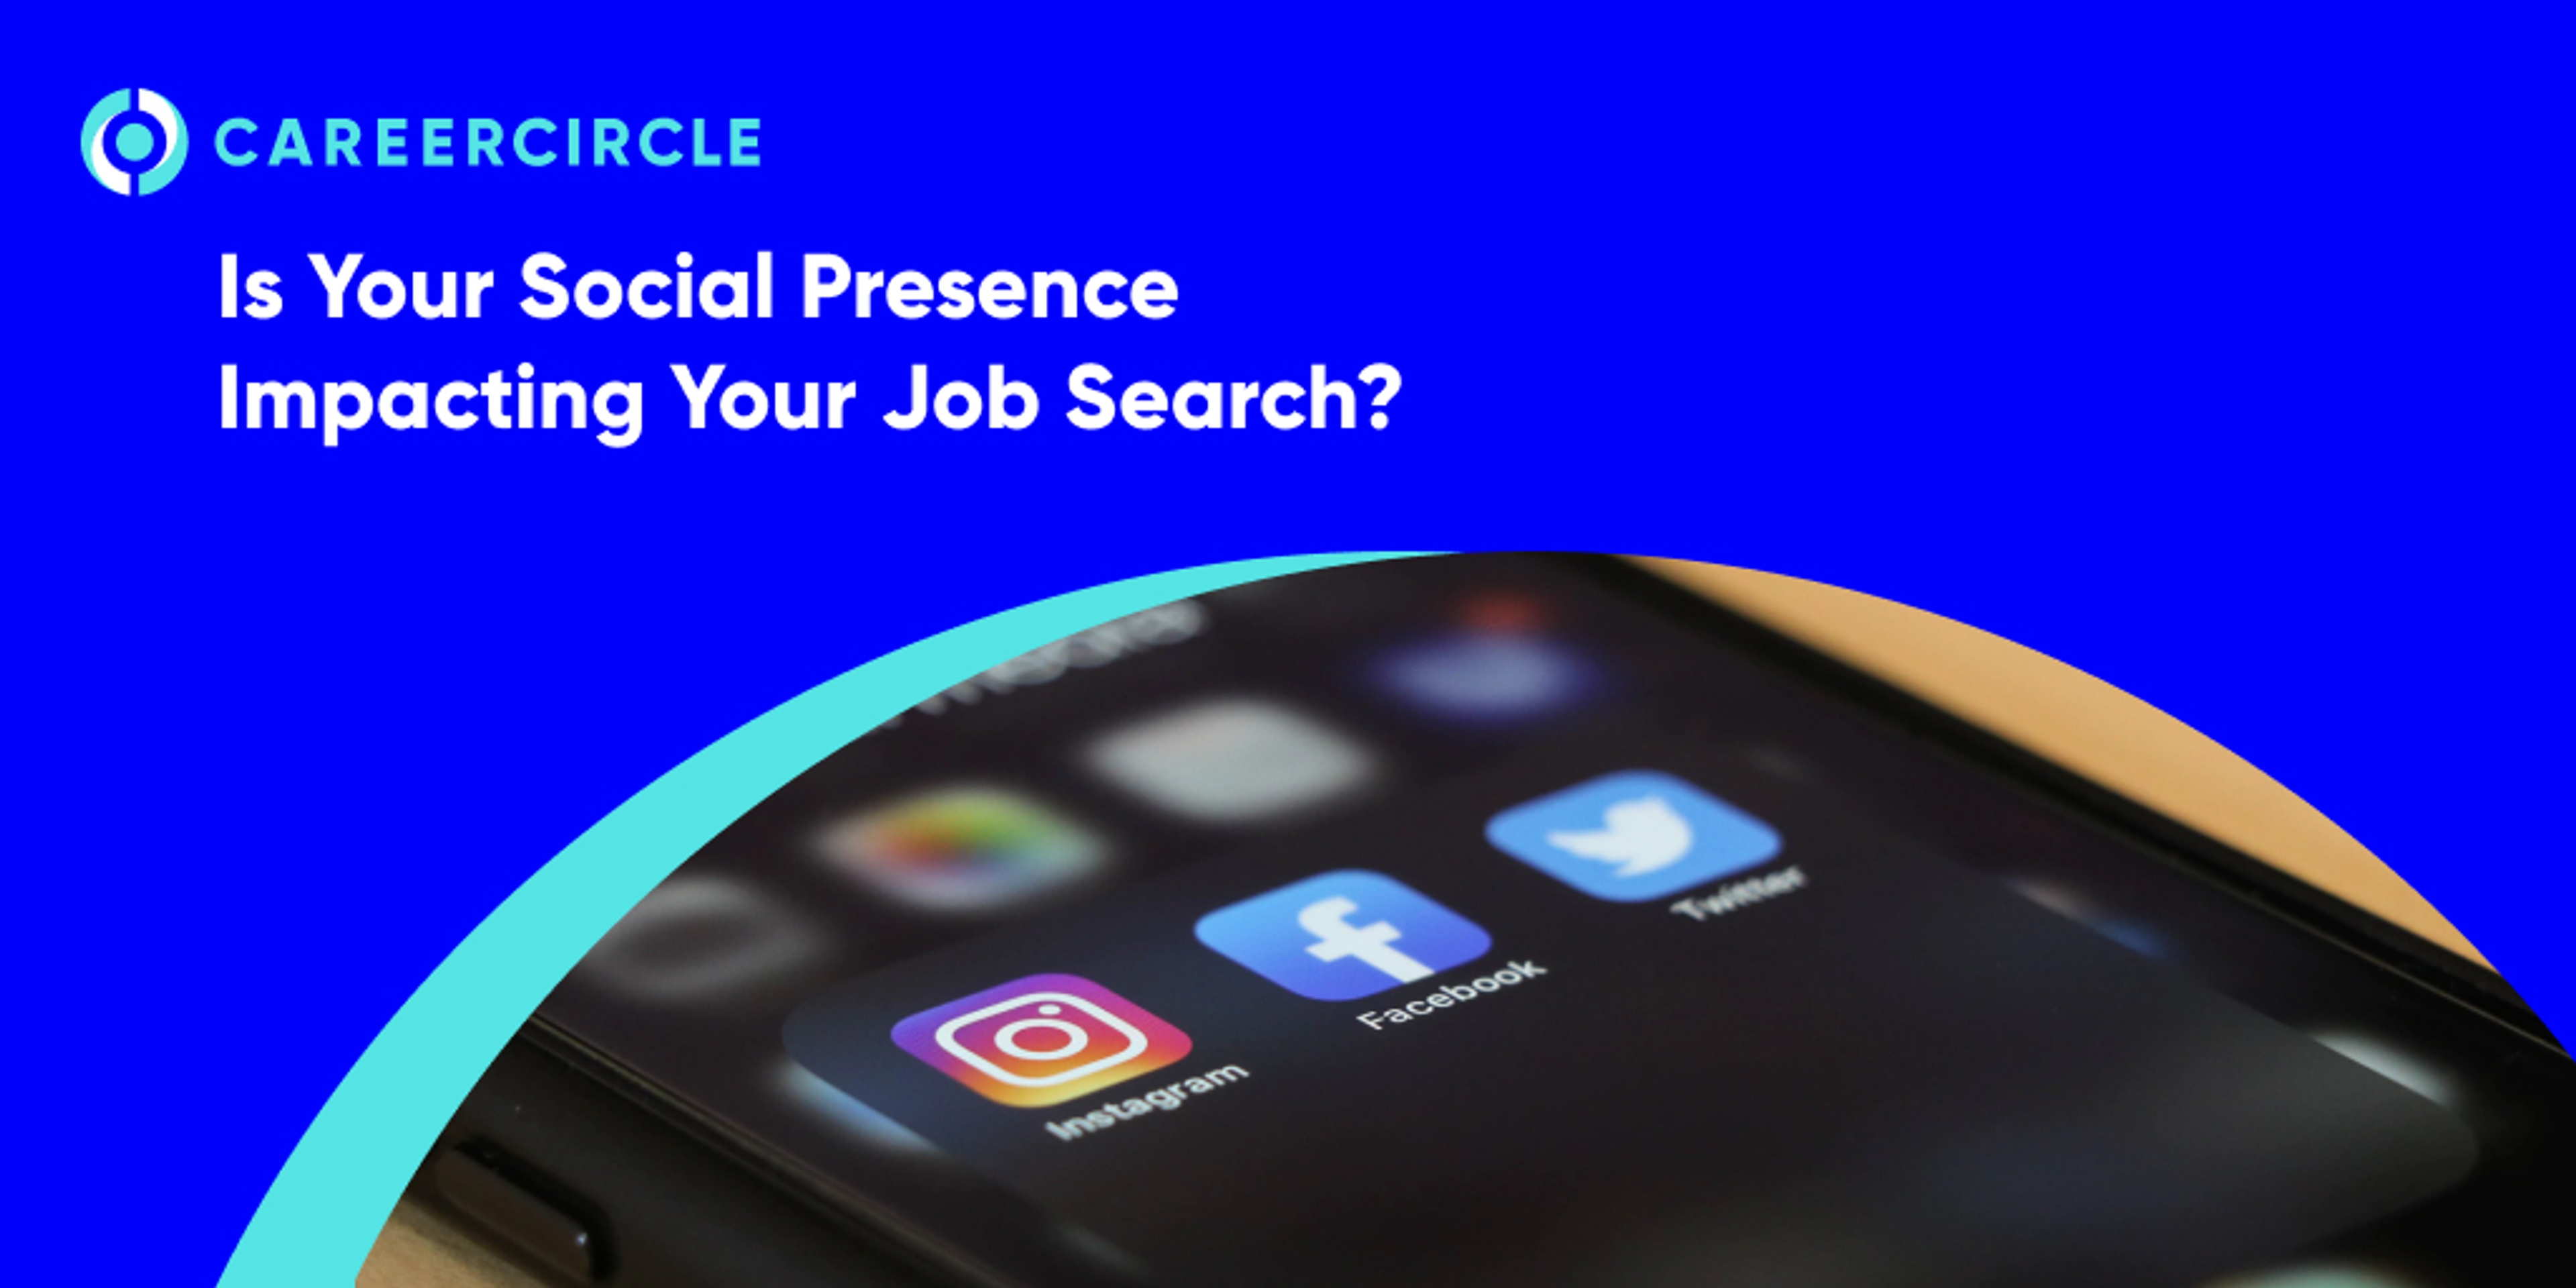 CareerCircle - "Is Your Social Presence Impacting Your Job Search?" Image of a phone with social media apps